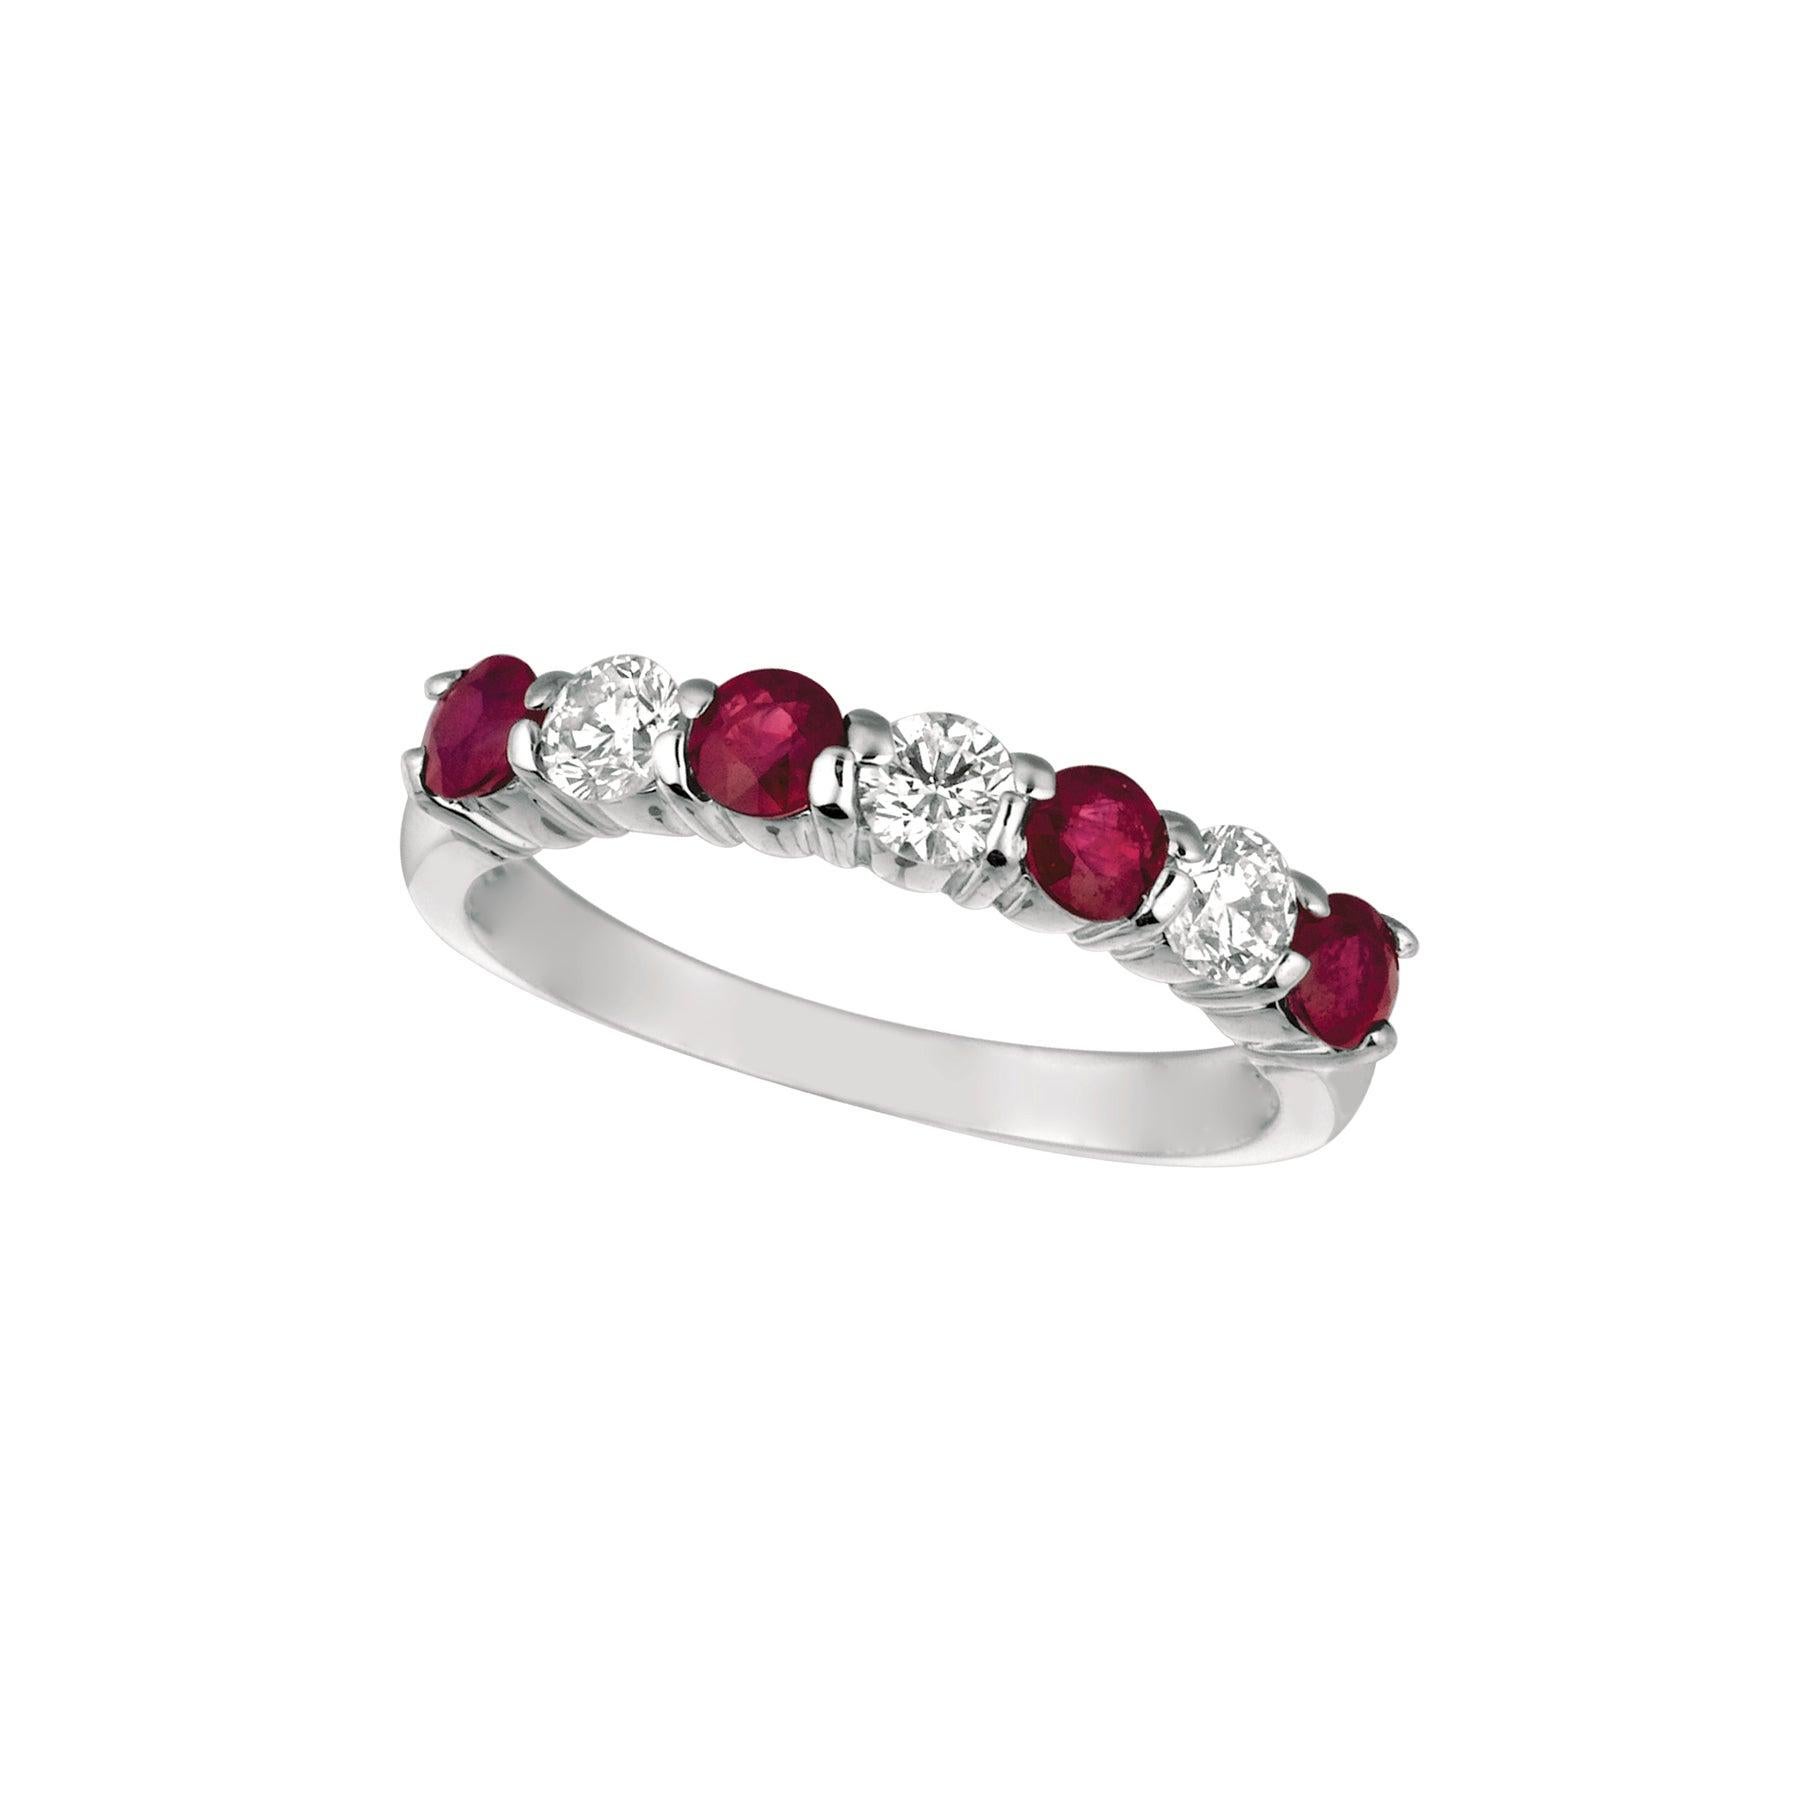 For Sale:  1.65 Carat Natural Diamond and Ruby 7-Stone Ring Band 14 Karat White Gold 2